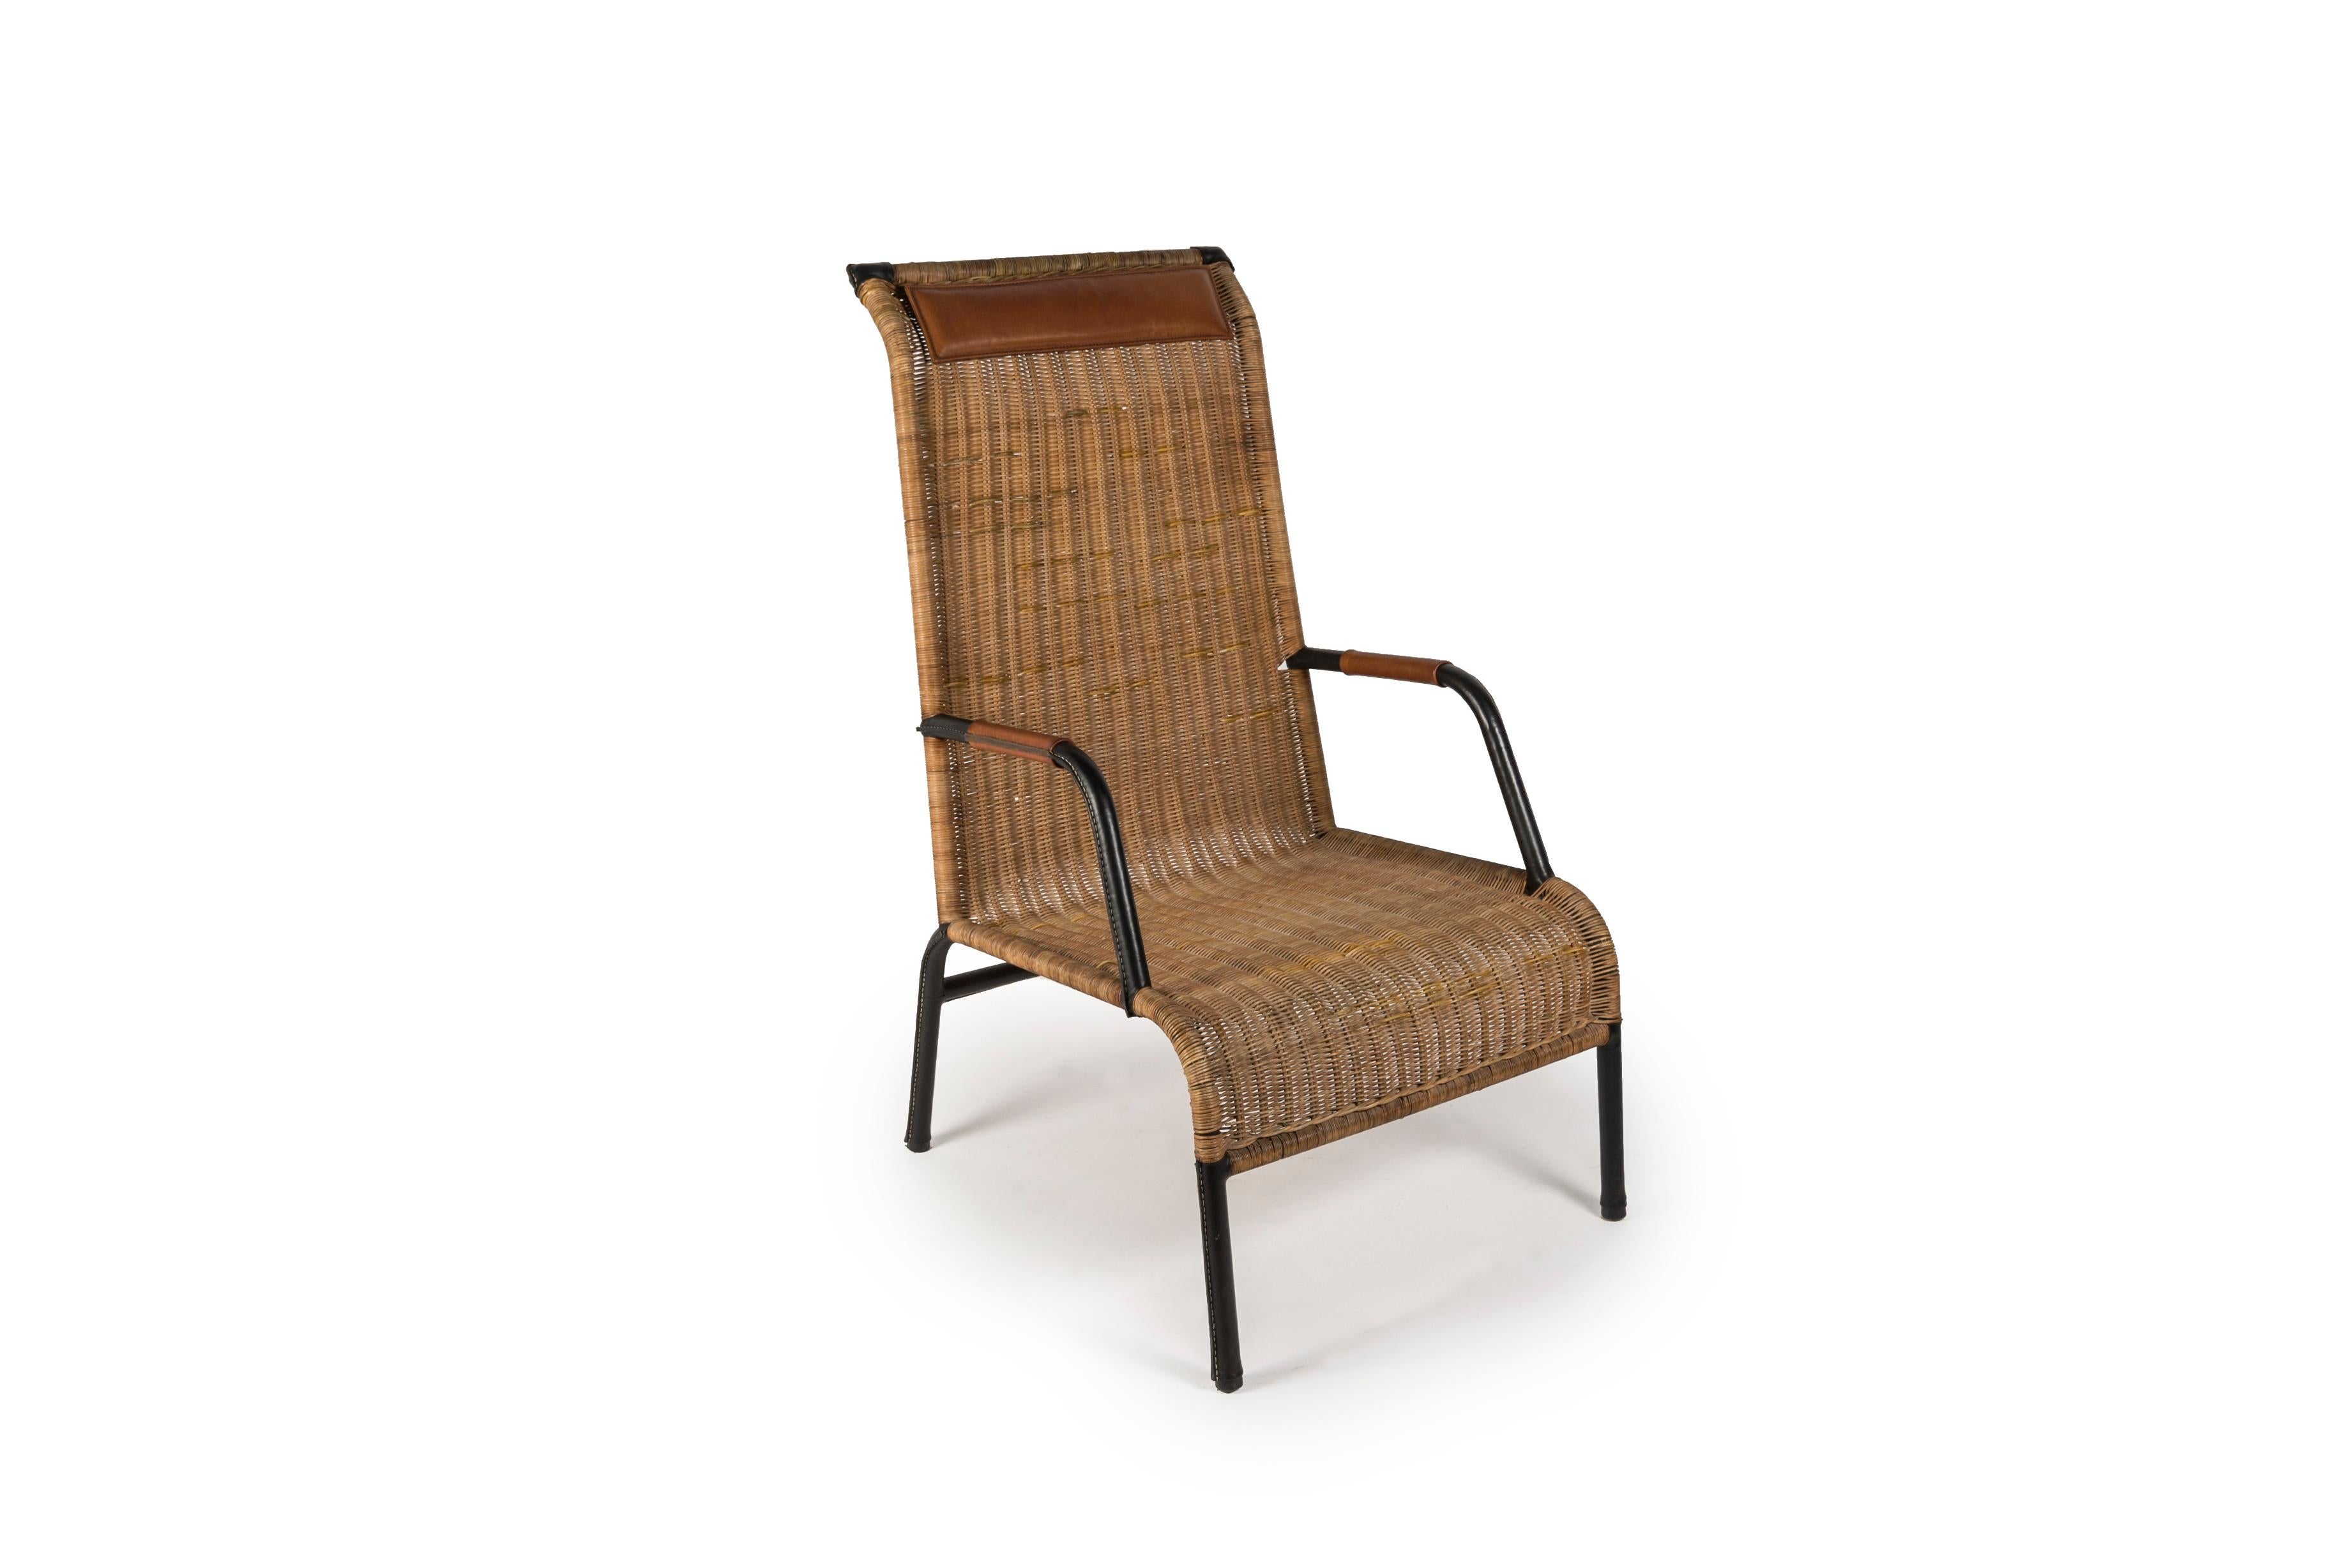 1950's Stitched leather and rattan armchairs by Jacques Adnet
France 
Rattan have been repair 